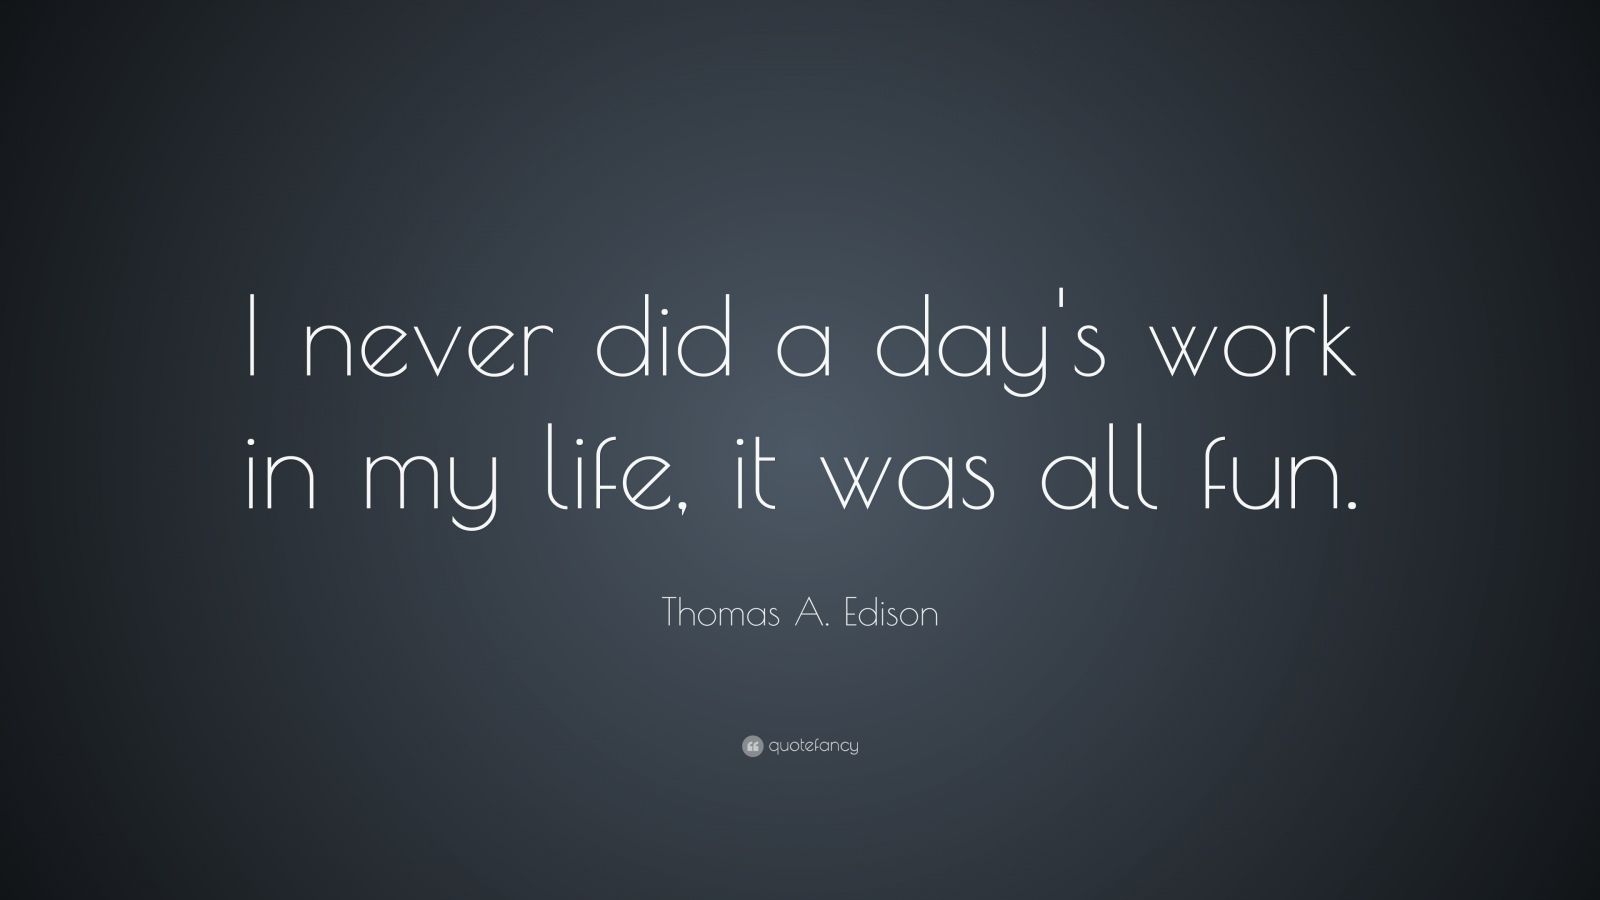 Thomas A. Edison Quote: “I never did a day's work in my life, it was all fun.” (7 ...